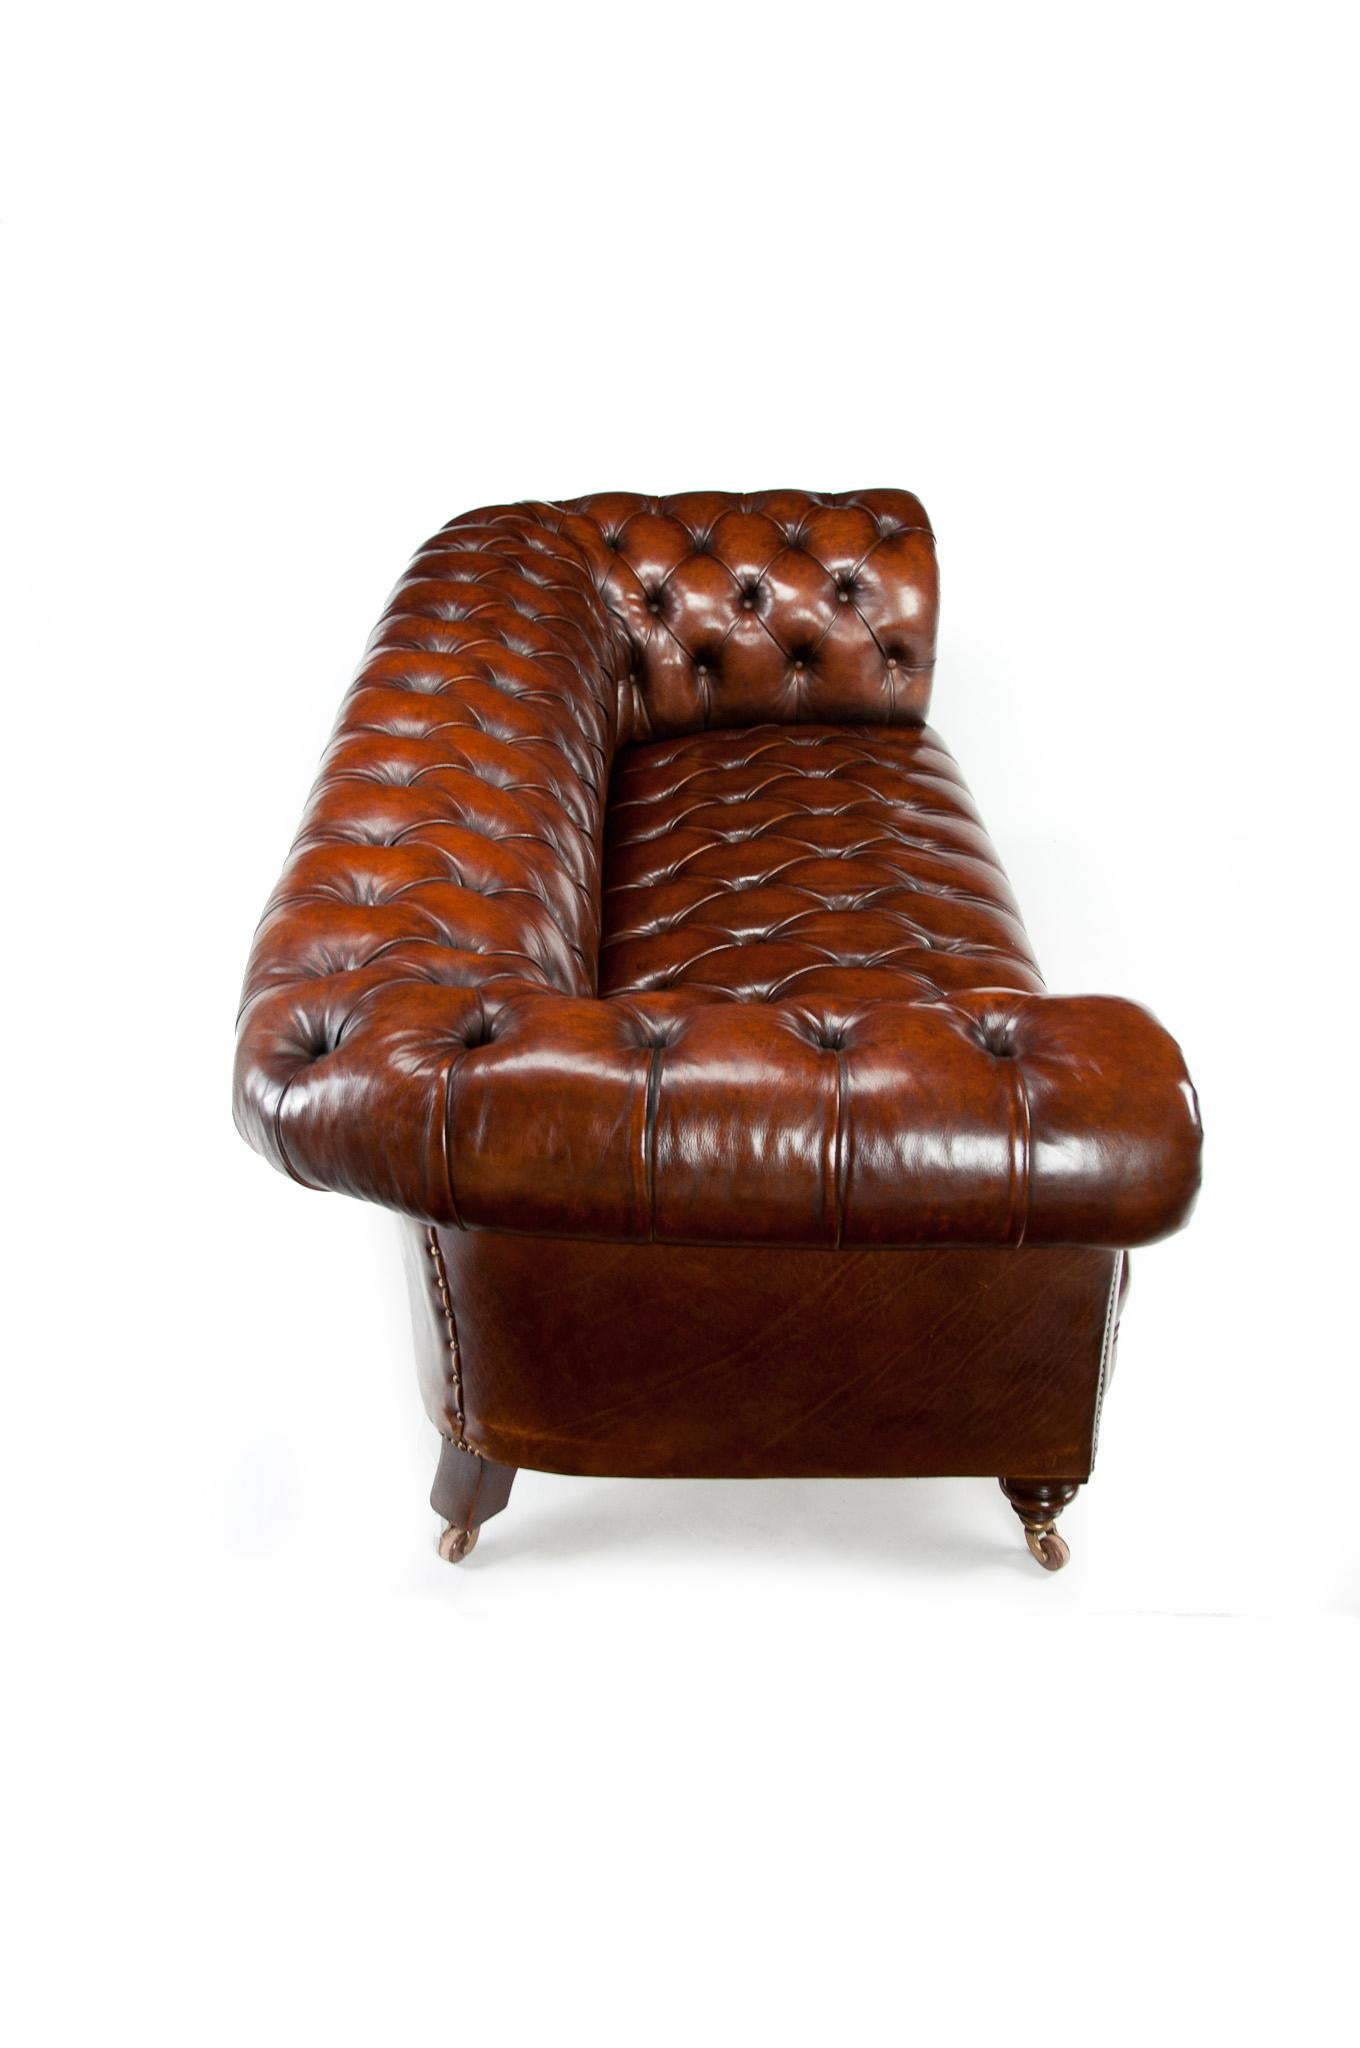 Wonderful 19th Century Deep Buttoned Leather Chesterfield by James Shoolbred 7